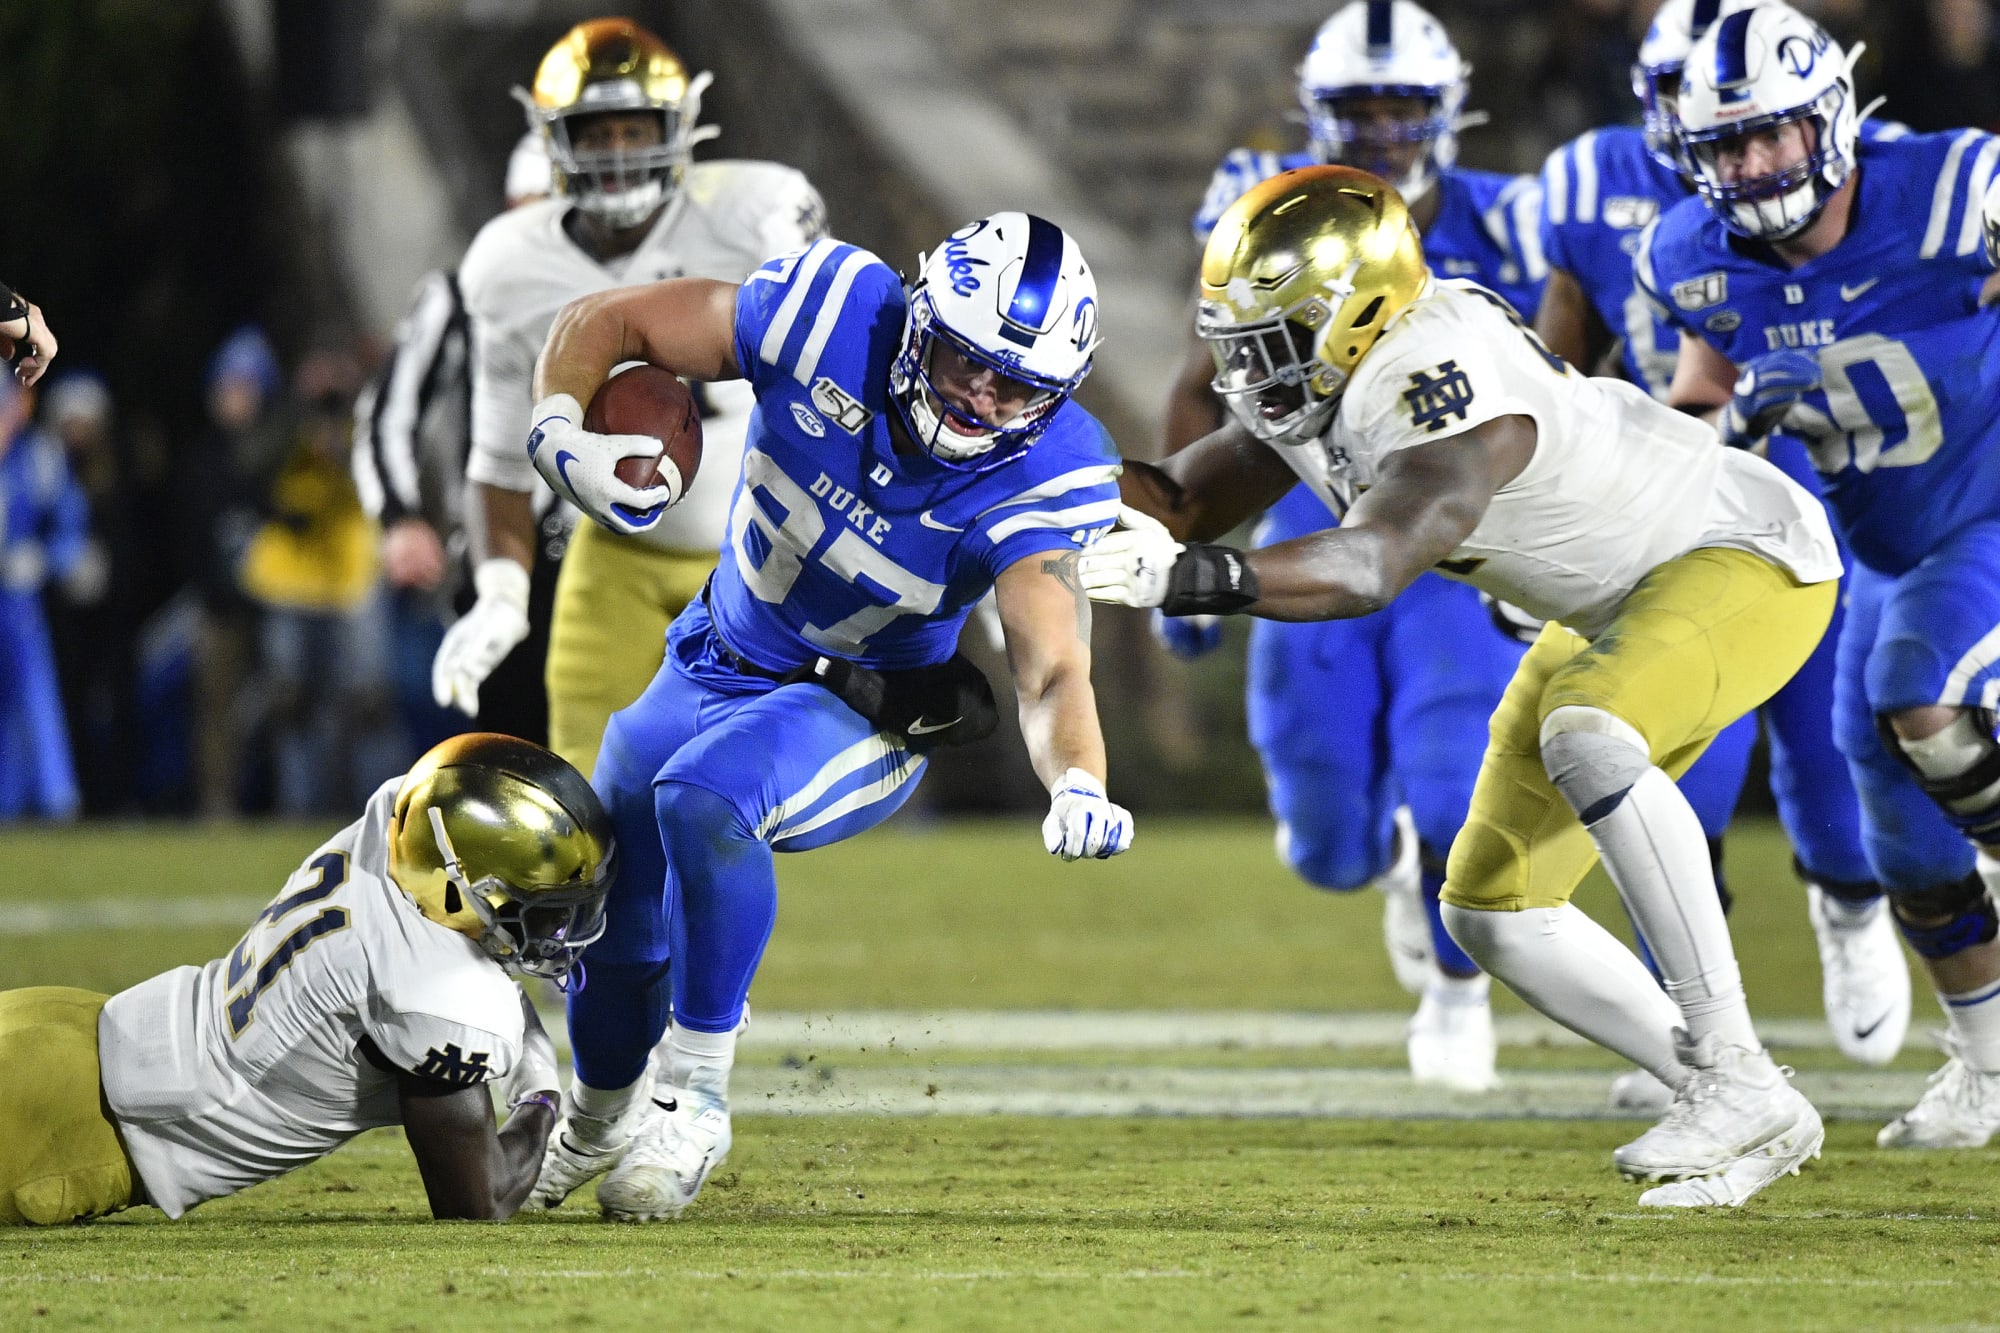 ACC revises Duke football schedule because of COVID19 pandemic